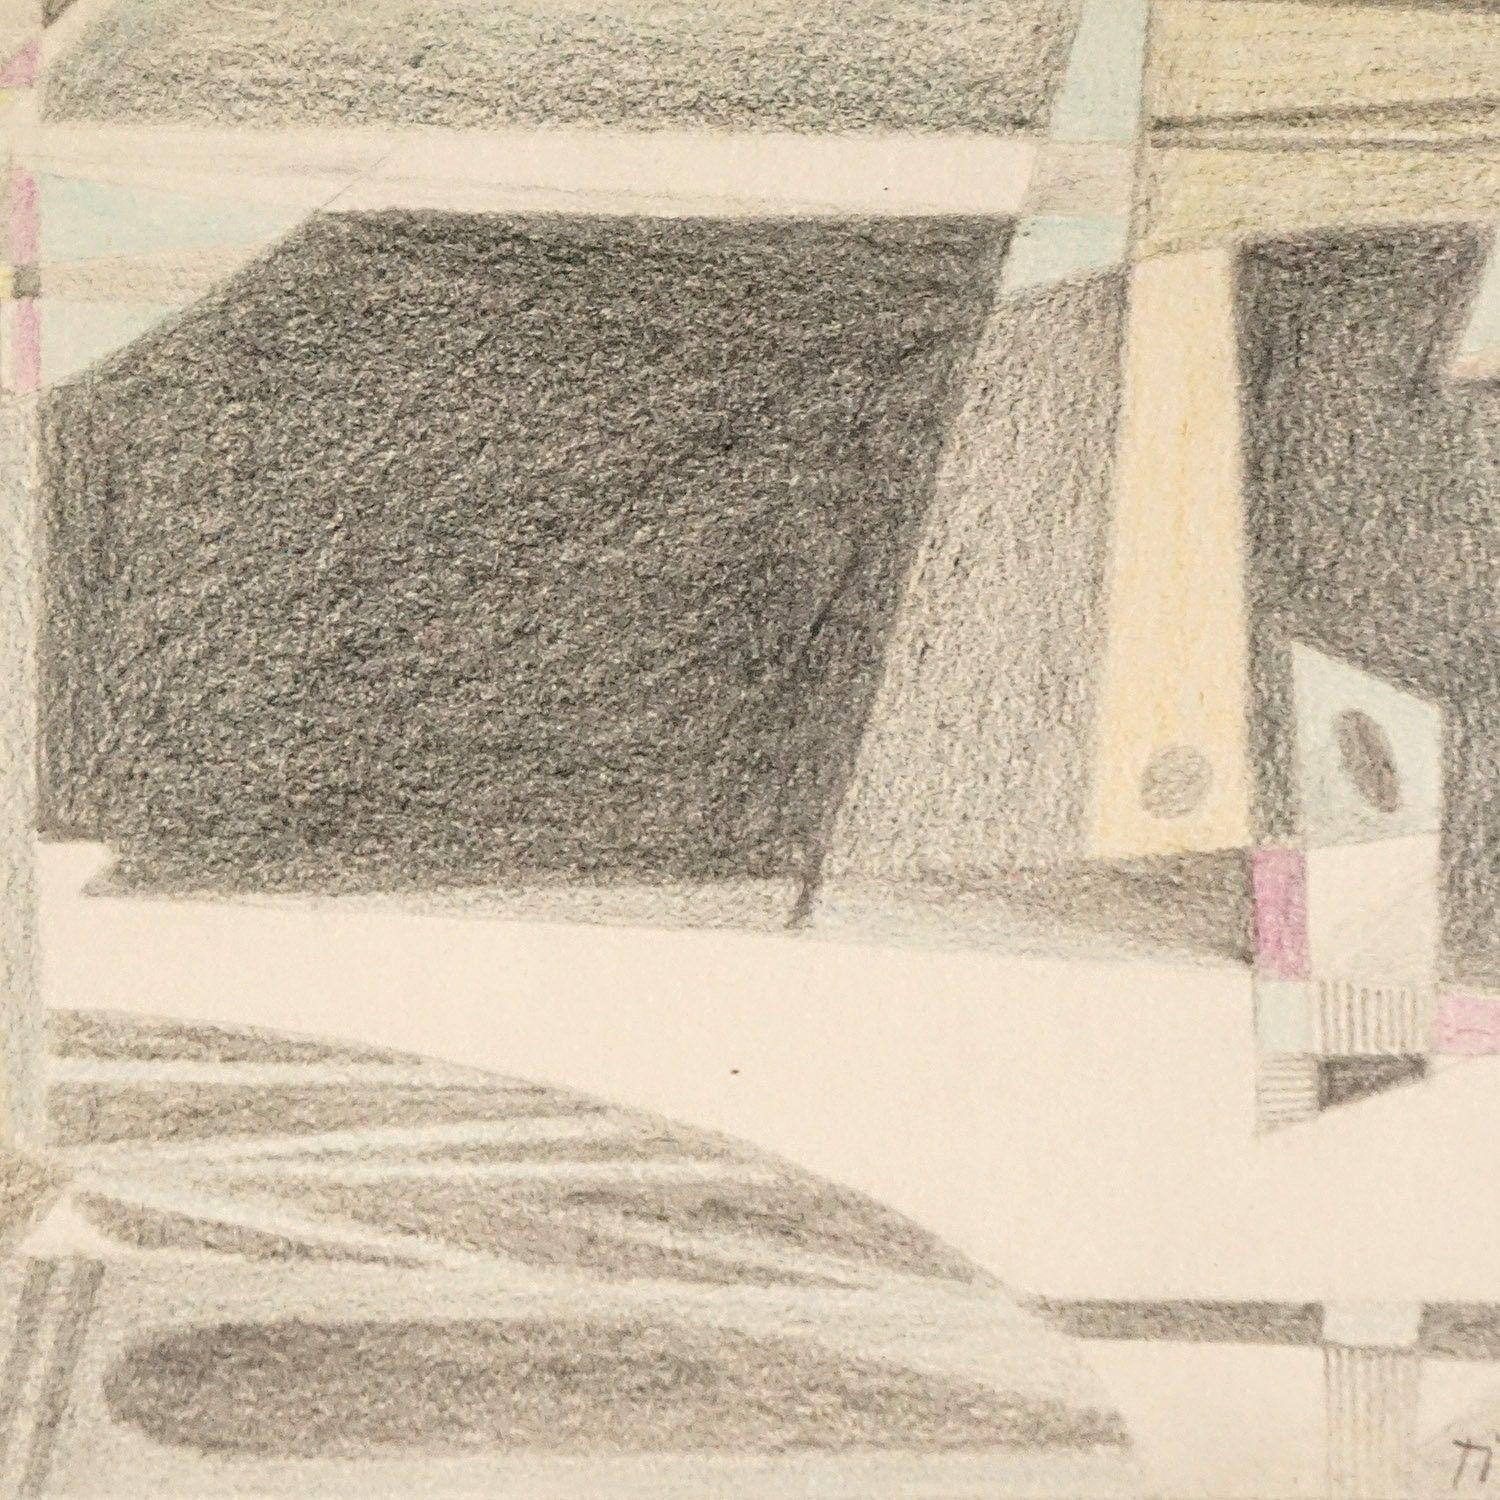 Hand-Crafted Small Vintage Cubist Crayon Cityscape Drawing by Václav Tikal, Czech, 1950s